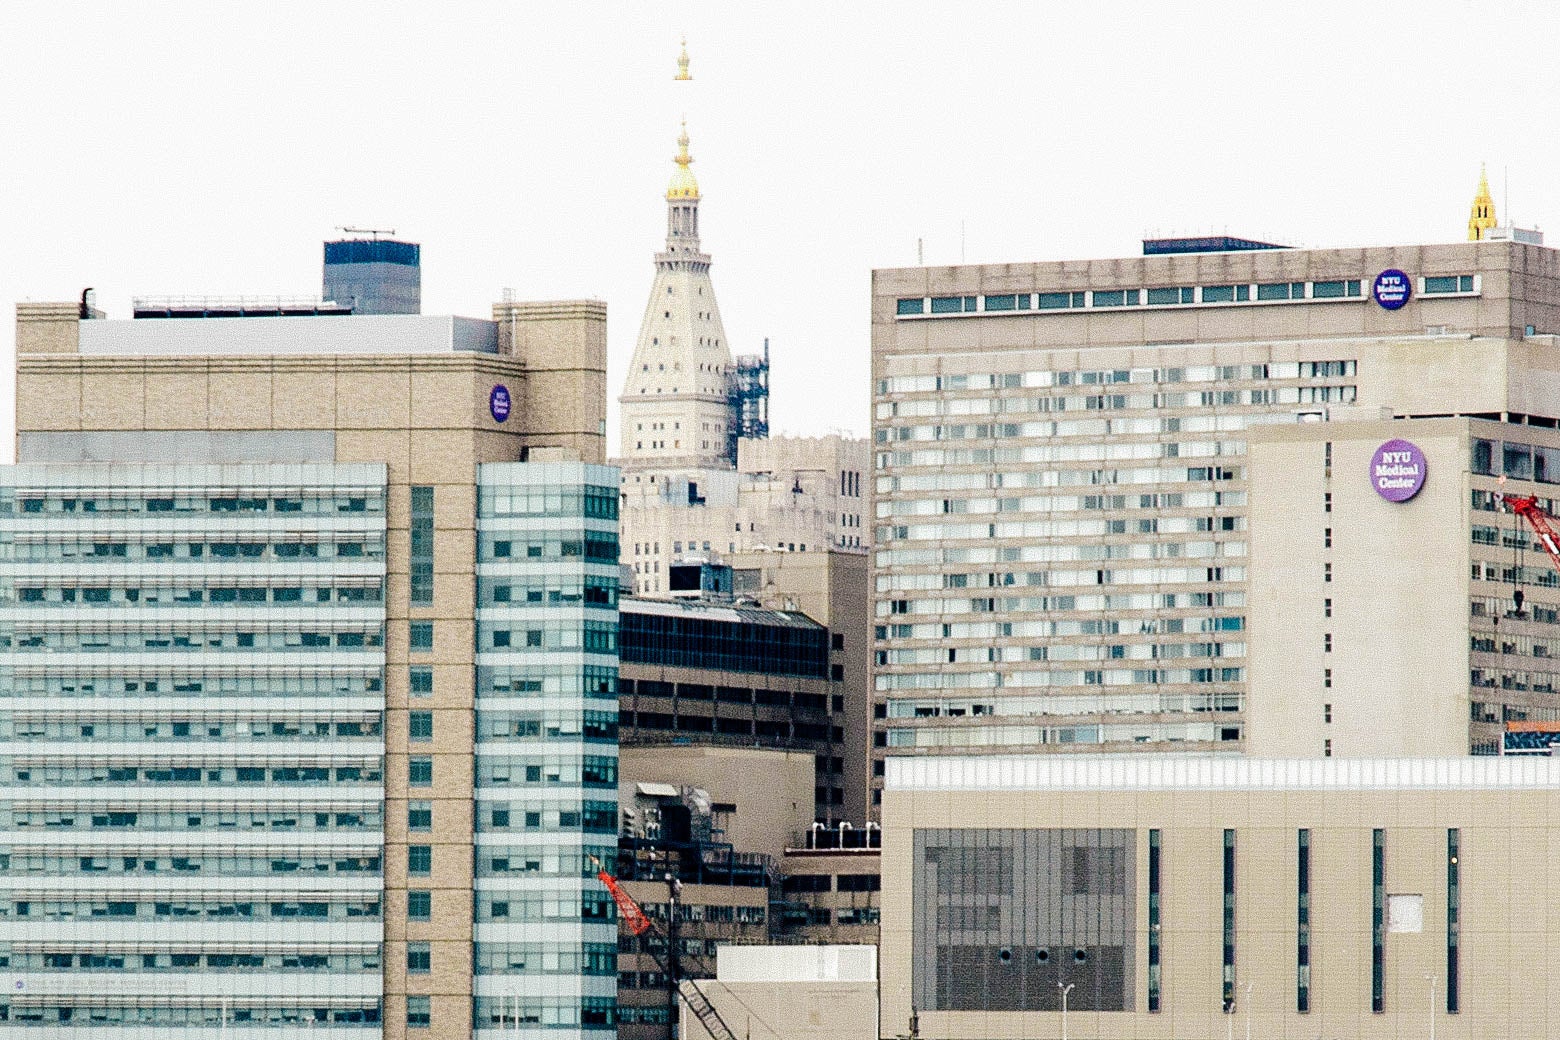 The gray buildings of NYU Langone Medical Center.